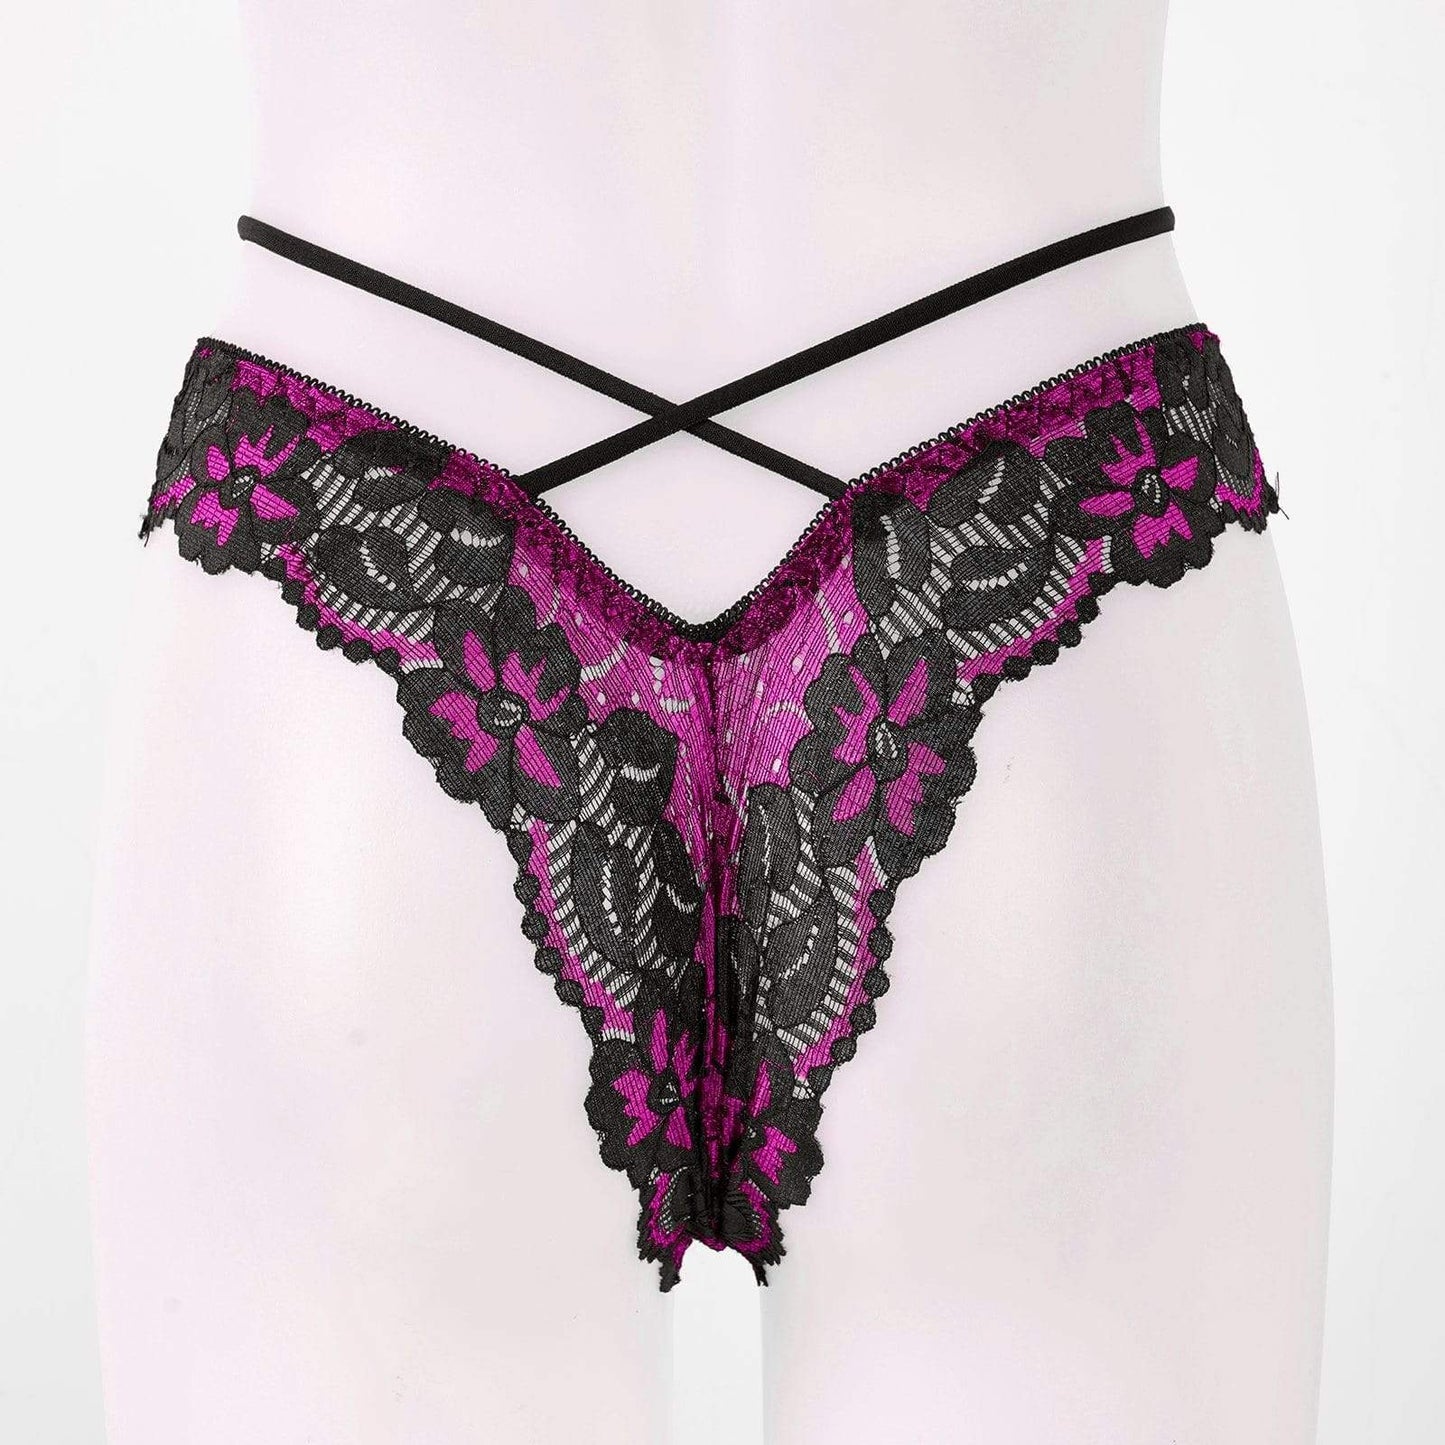 Kinky Cloth 351 Bowknot Floral Lace String Panties